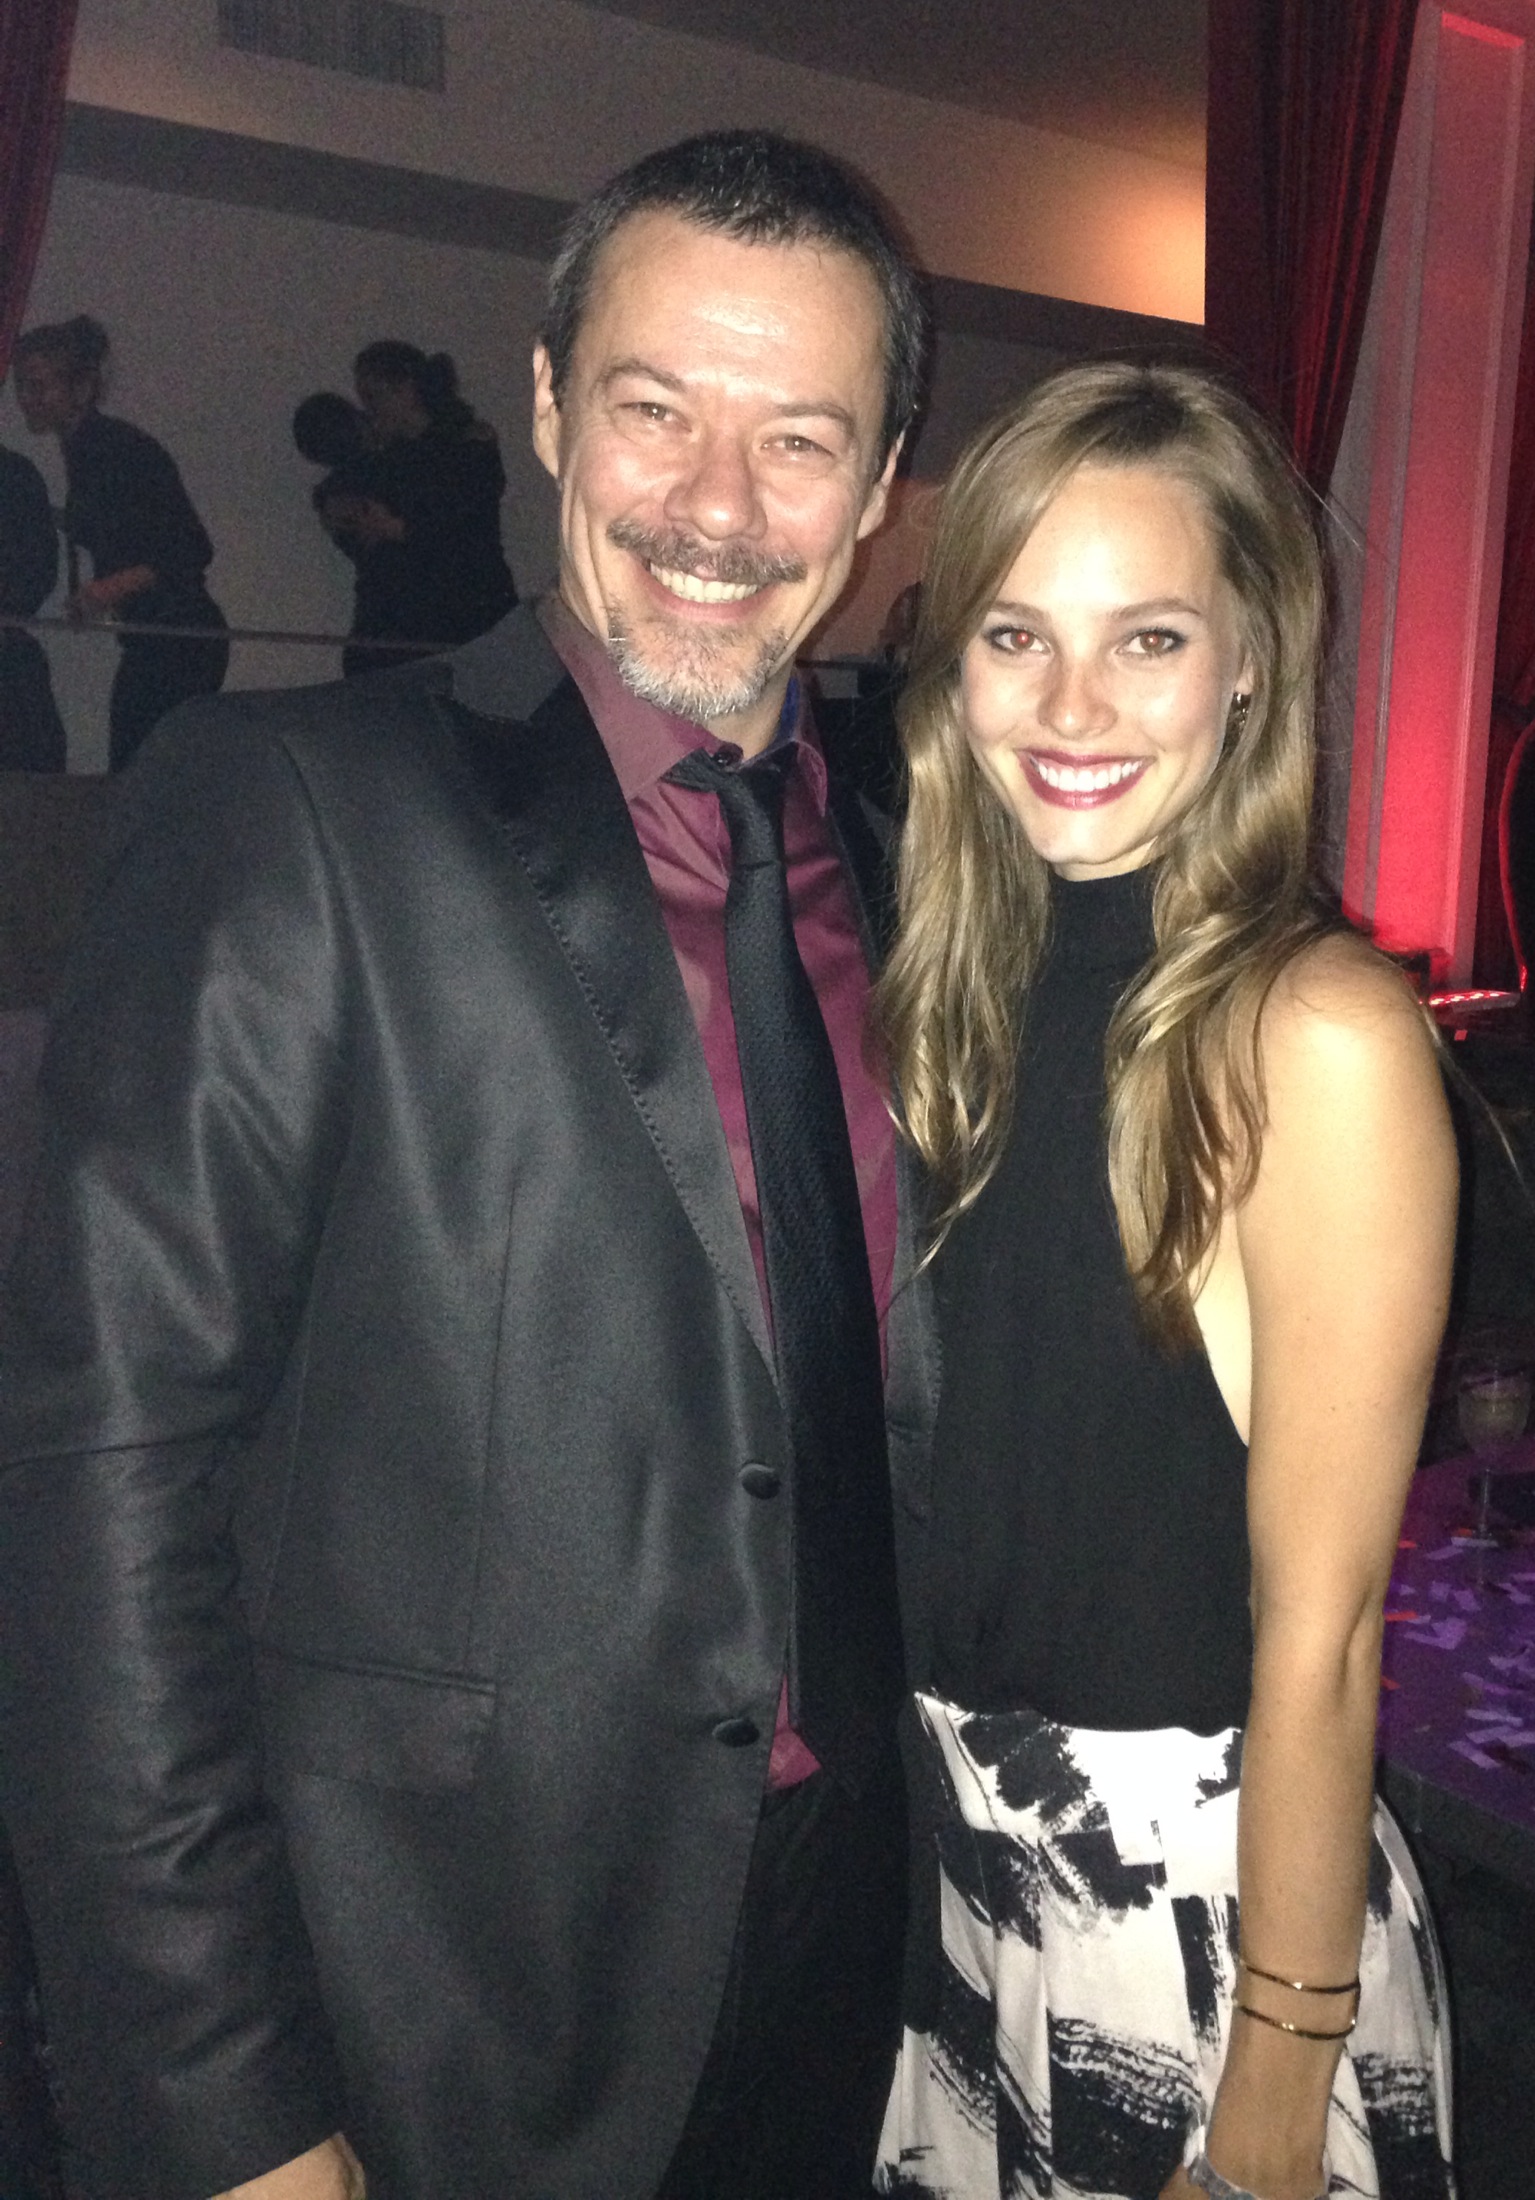 True Blood wrap party with With Bailey Noble.